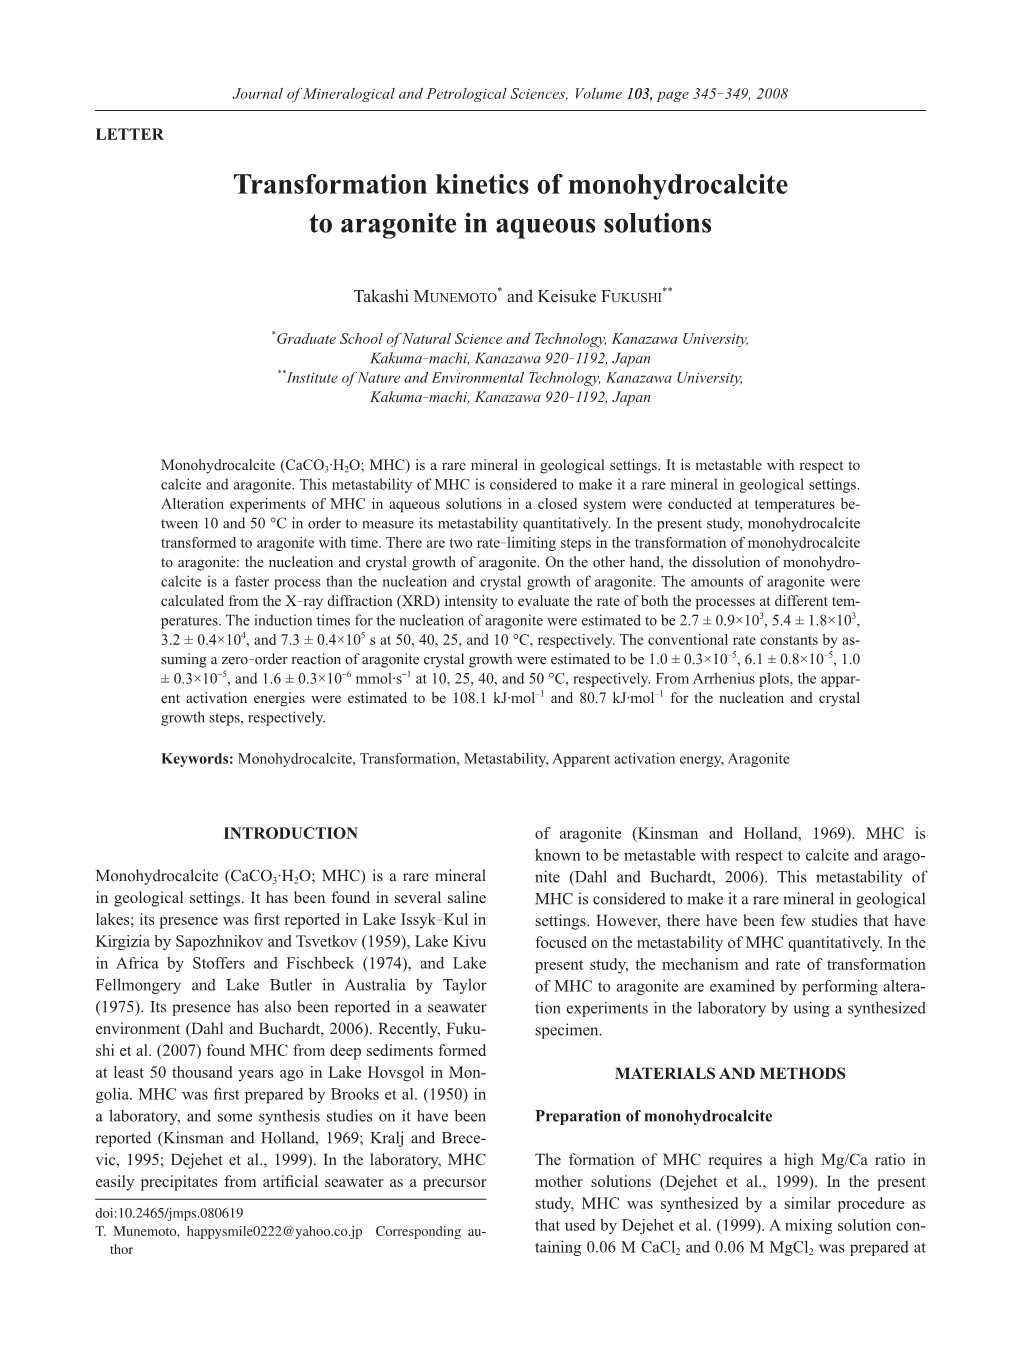 Transformation Kinetics of Monohydrocalcite to Aragonite in Aqueous Solutions